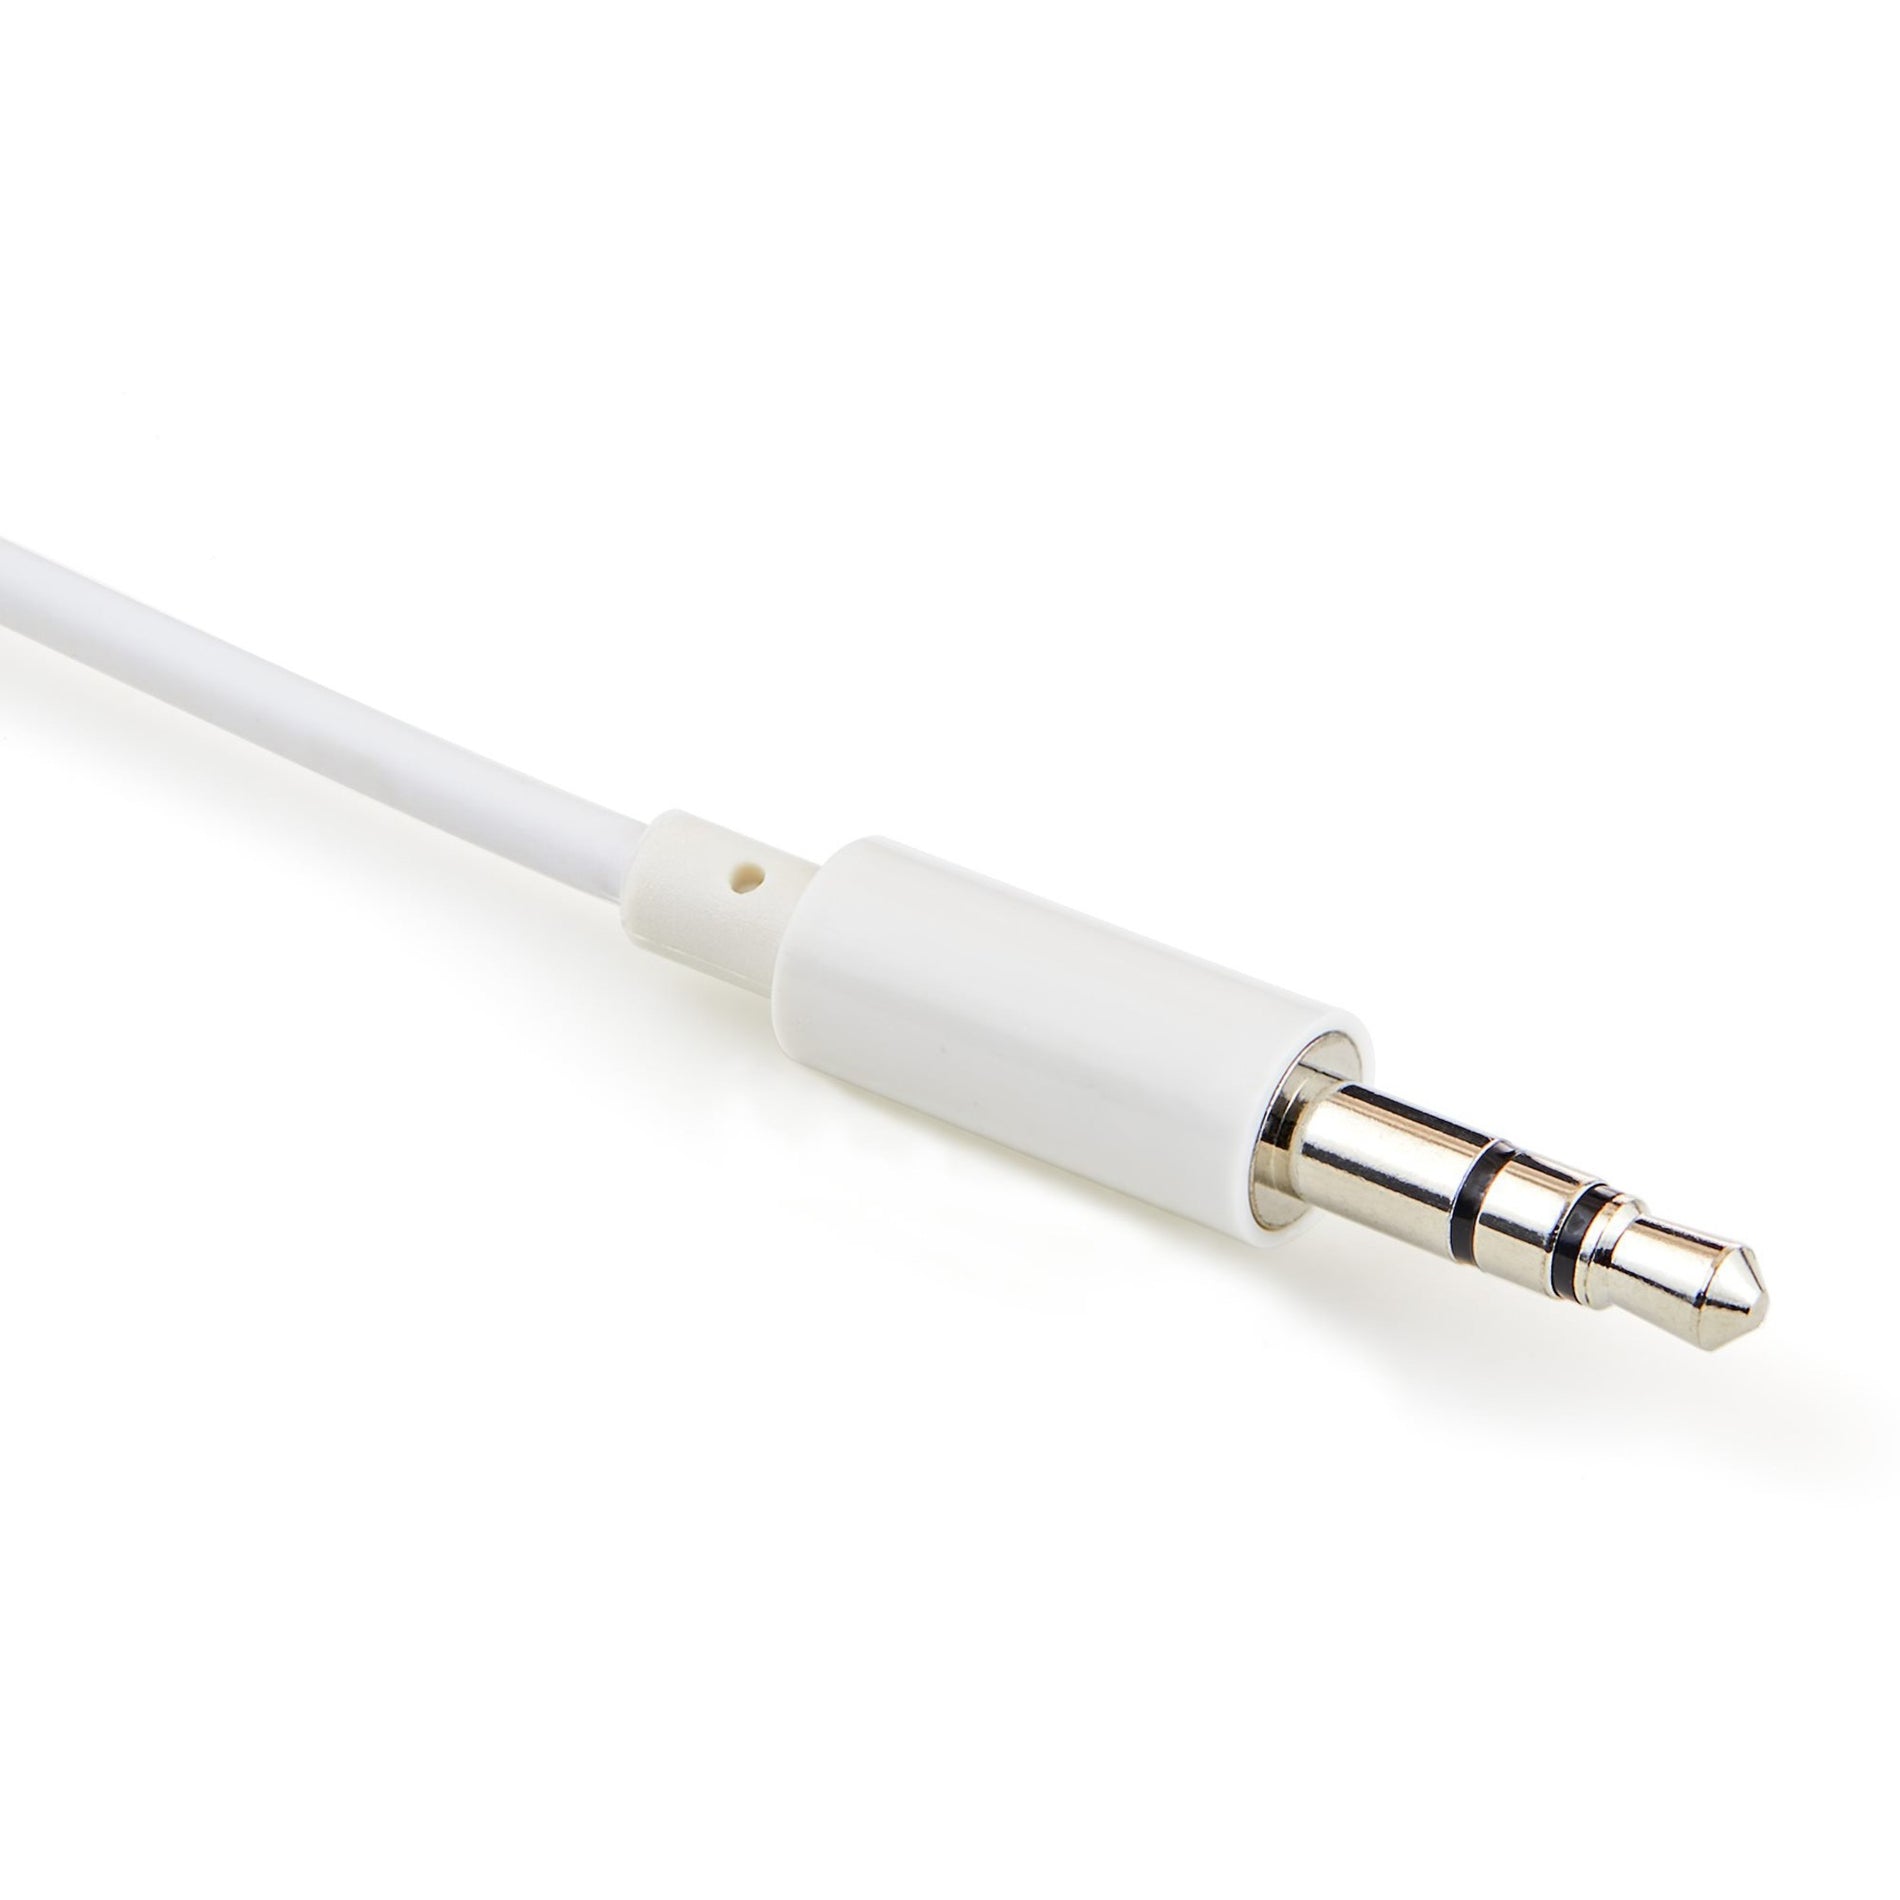 StarTech.com MUY1MFFADPW White Stereo Splitter Adapter - 3.5mm Male to 2x 3.5mm Female, Molded, 6" Cable Length